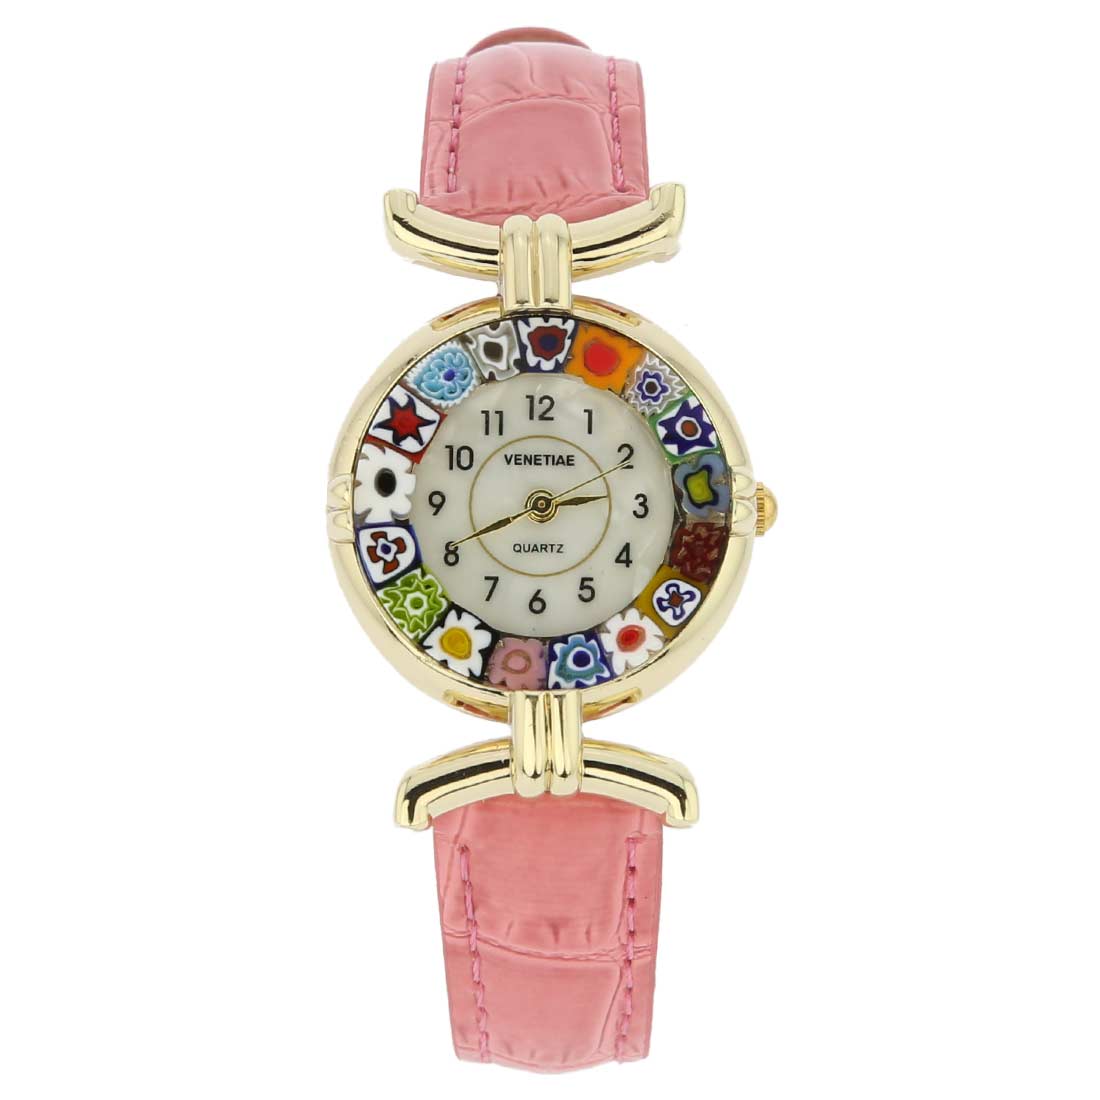 Murano Millefiori Watch With Leather Band - Pink Multicolor